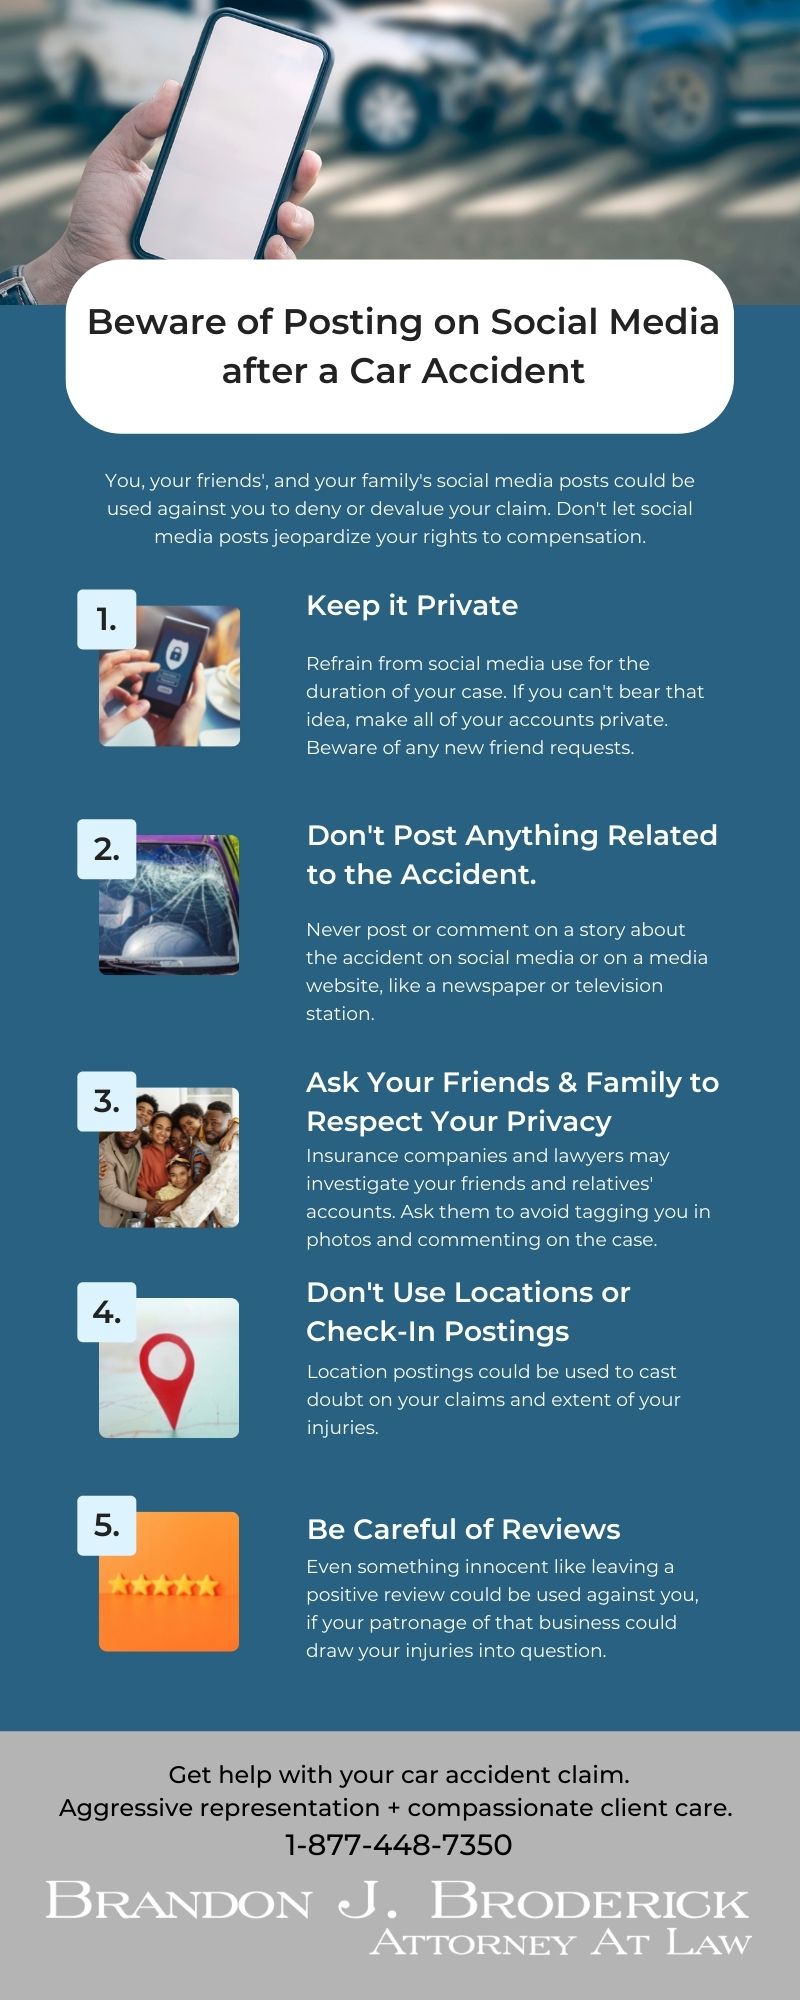 Posting on social media after a car accident can jeopardize your claim